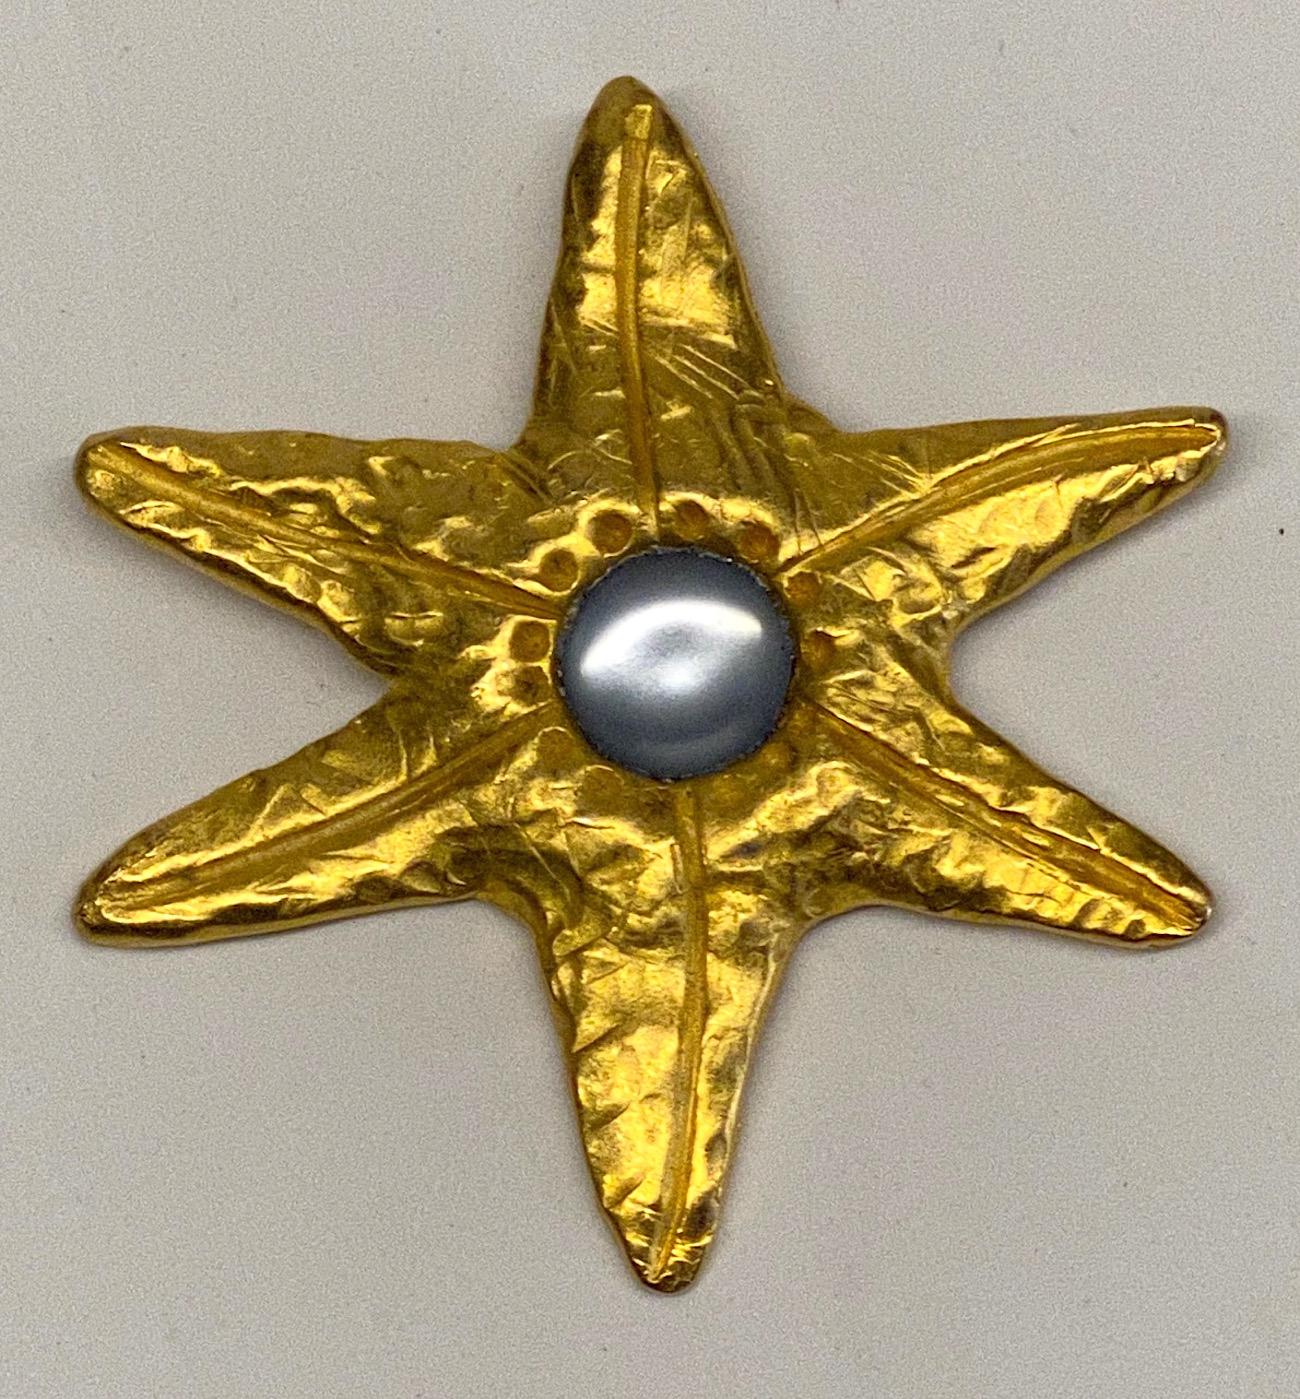 1980s satin gold martele' finish abstract star brooch by French desinger Sophie Goetsch. The center is set with a frosted light blue lucite cabochon. Brooch measures 3.25 inches in diameter and .38 of an inch high not including the pin. The back has